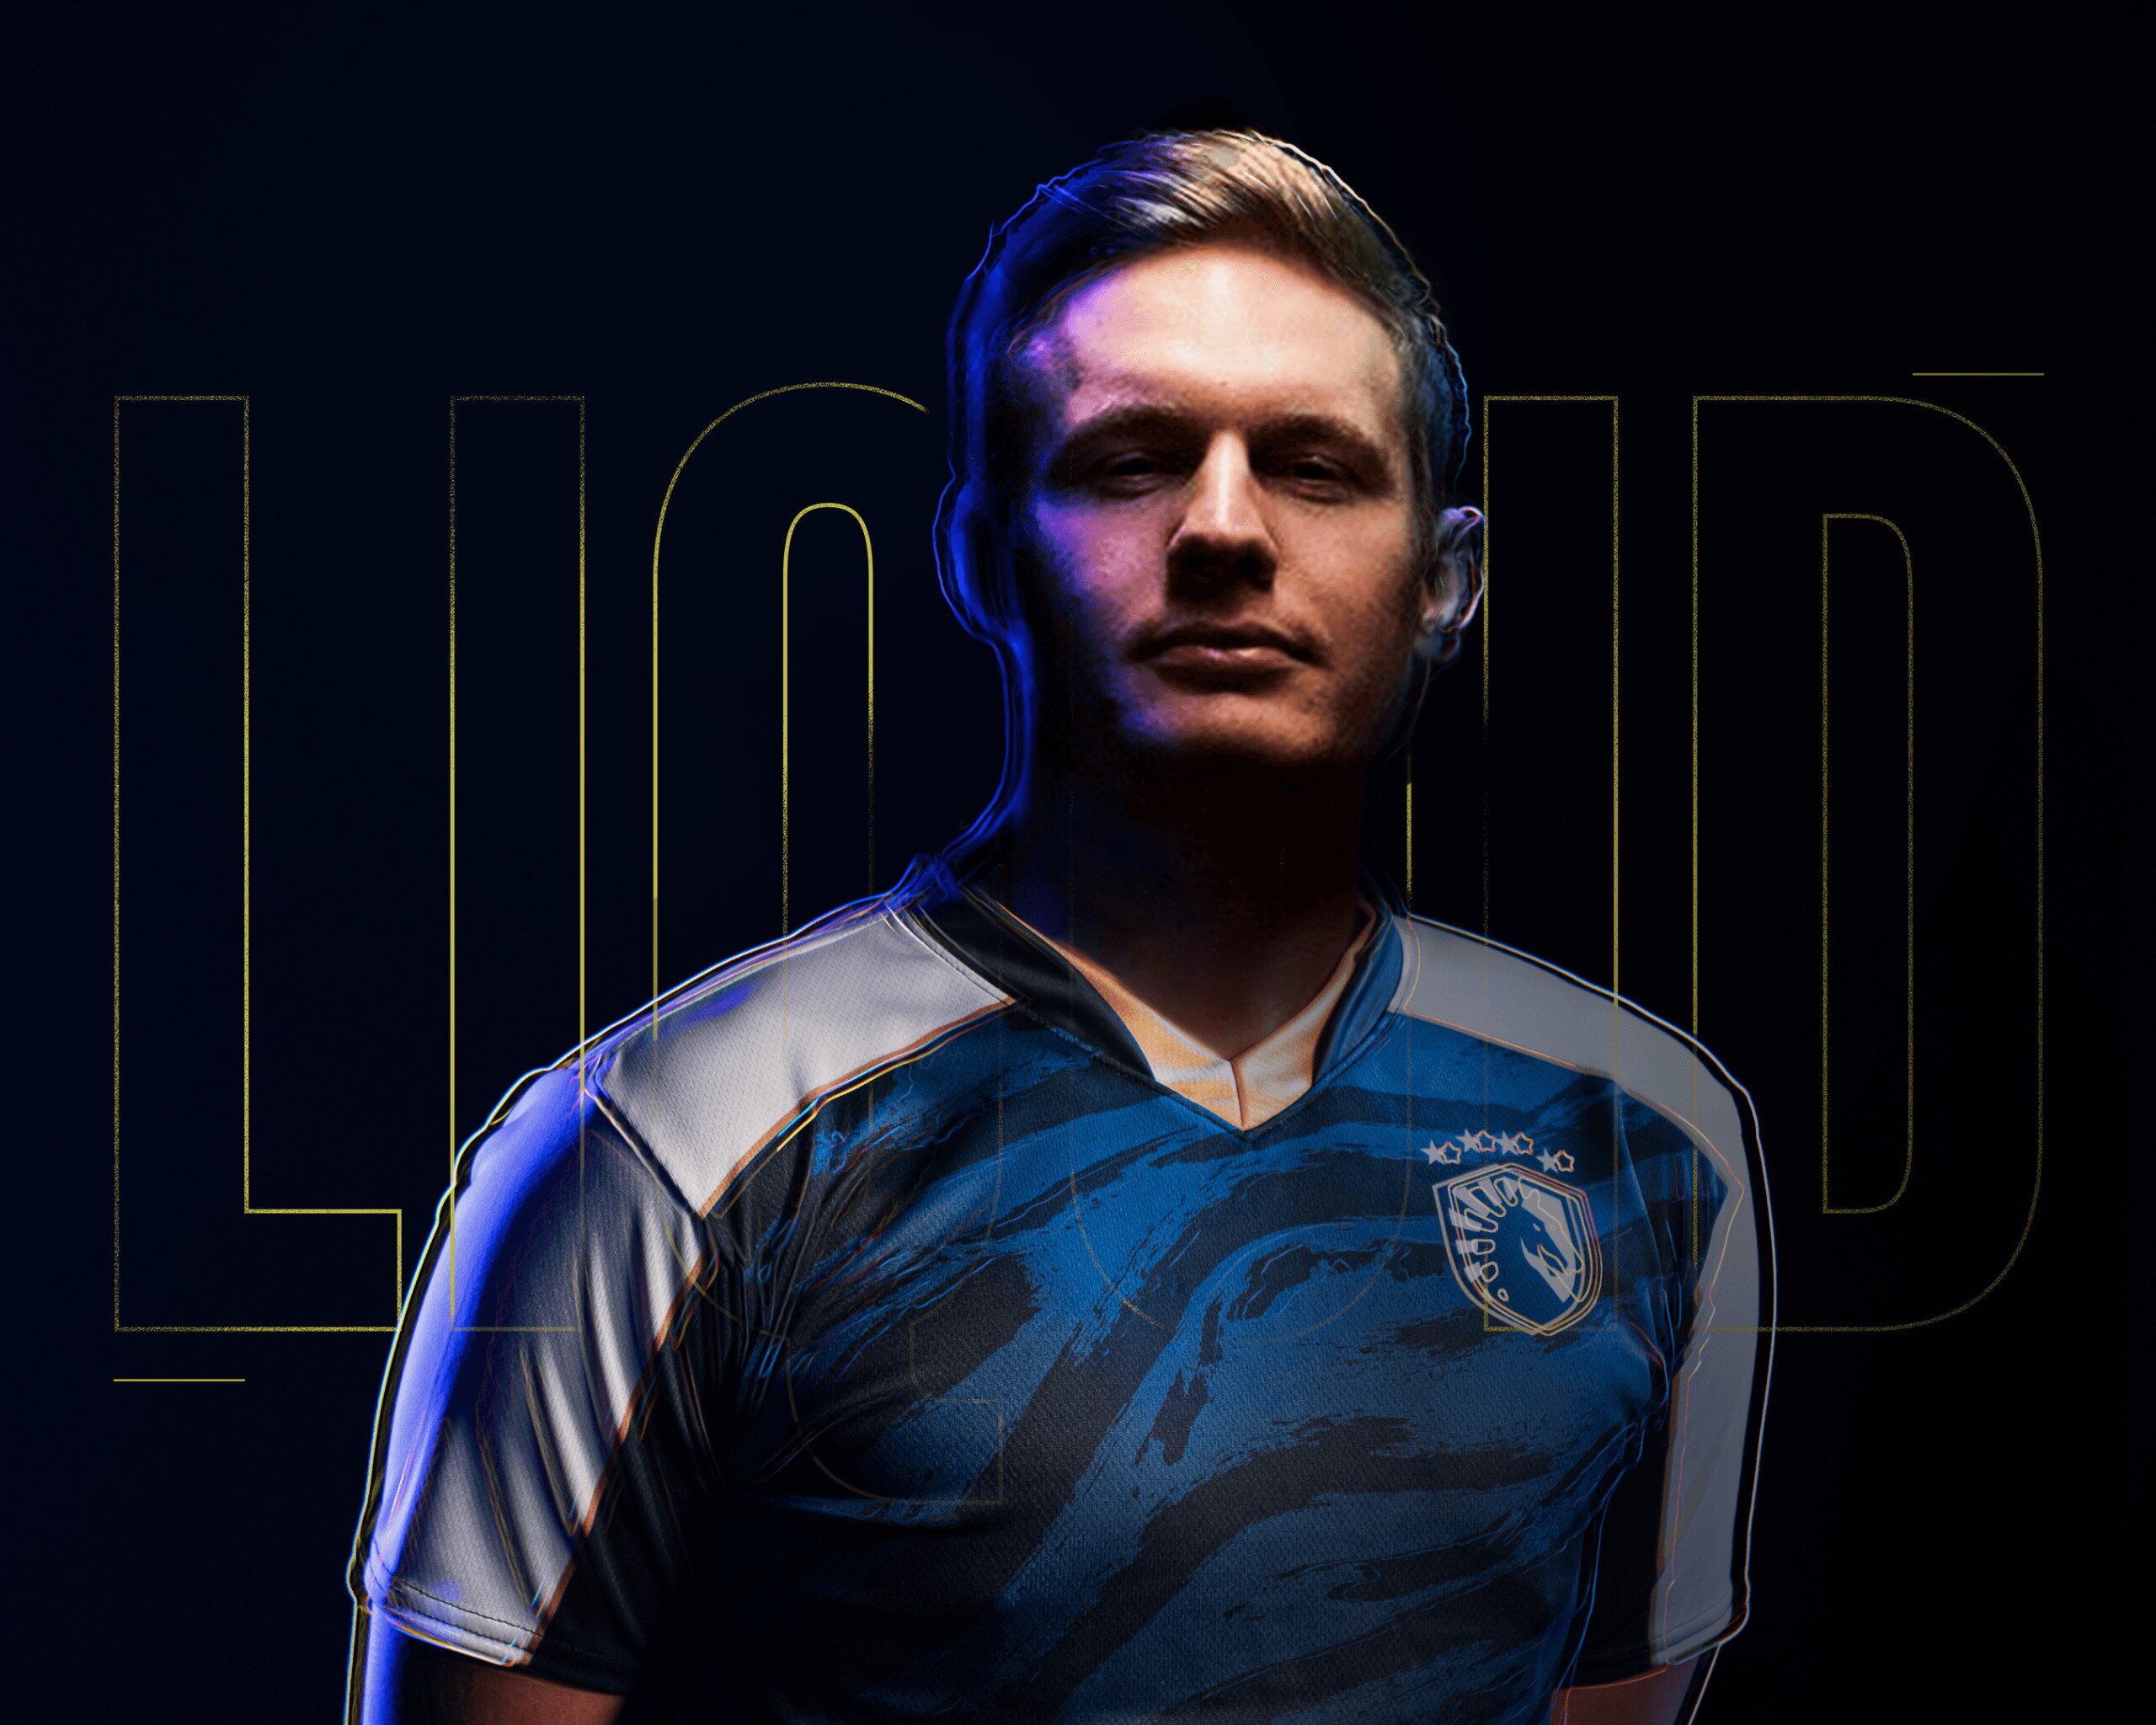 Broxah will be playing on an org other than Fnatic for the first time since 2016 (Photo via Broxah/Twitter)